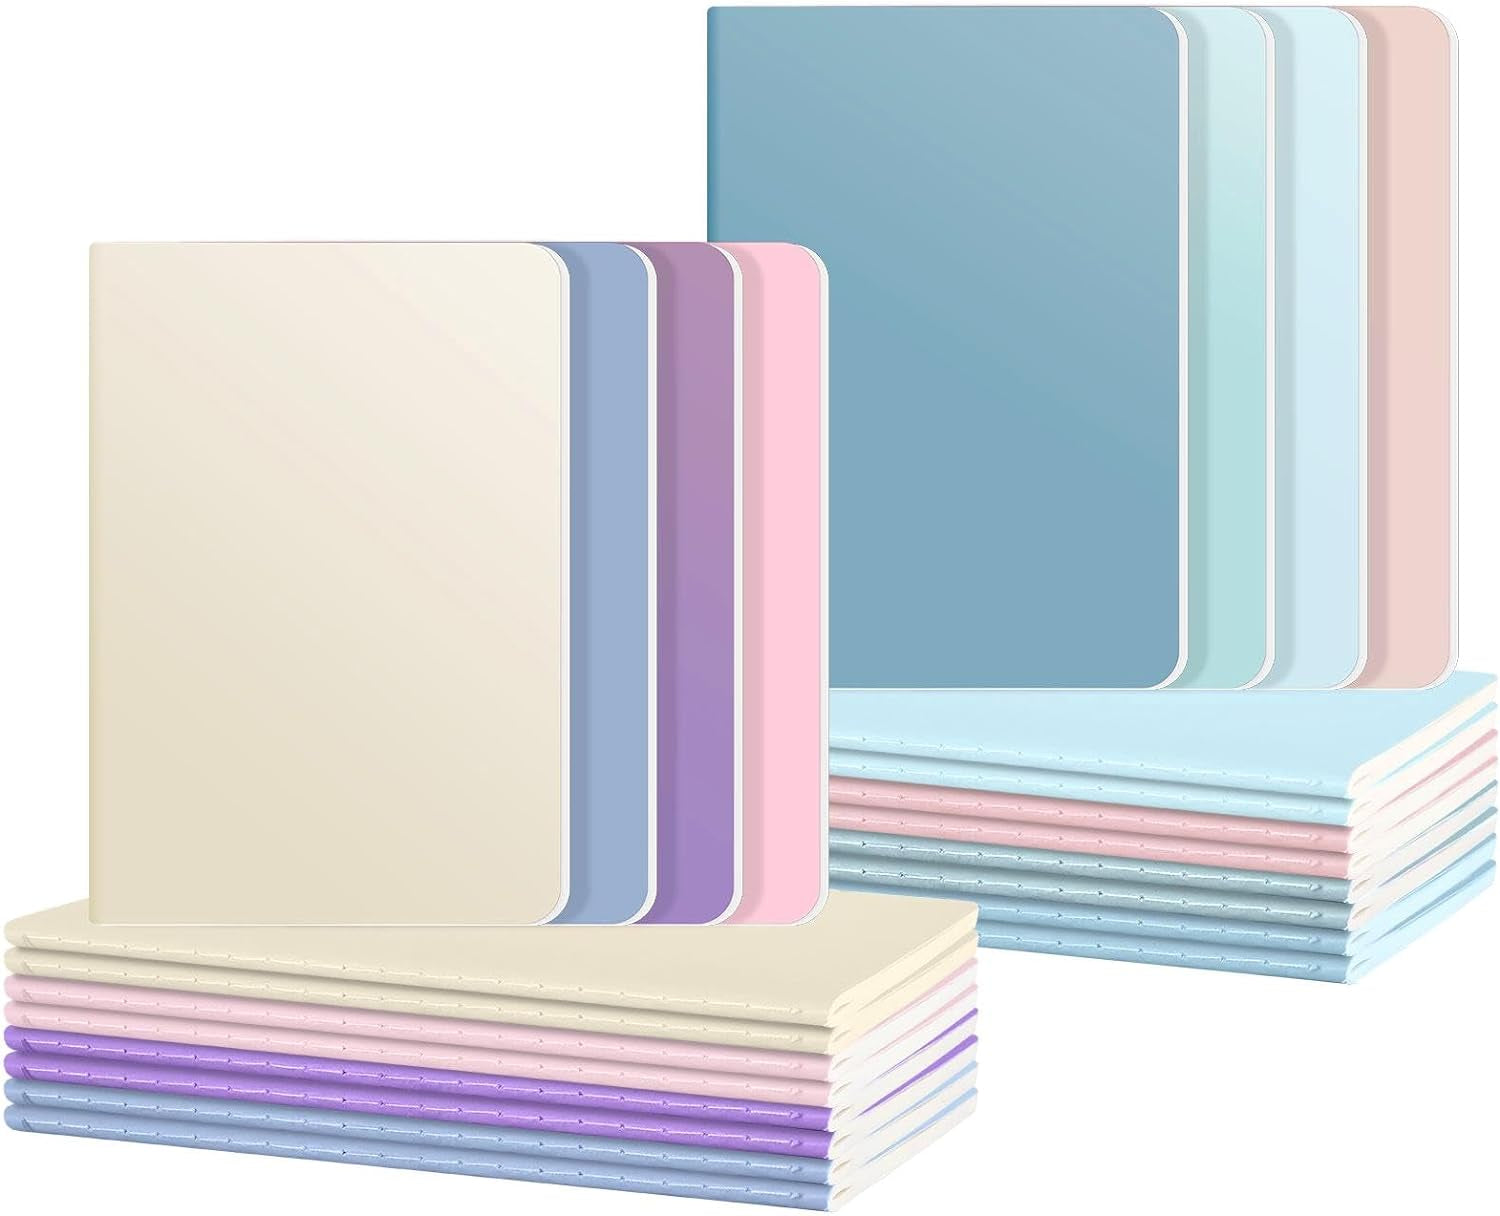 24 Pack Colorful Notebooks, Journals in Bulk, Lined Paper Sketchbooks, 72 Pages, 36 Sheets, 8.3X5.5 Inch, A5 Size, Travel Writing Notebooks Journal for Office School Supplies (24, 8 Colors)